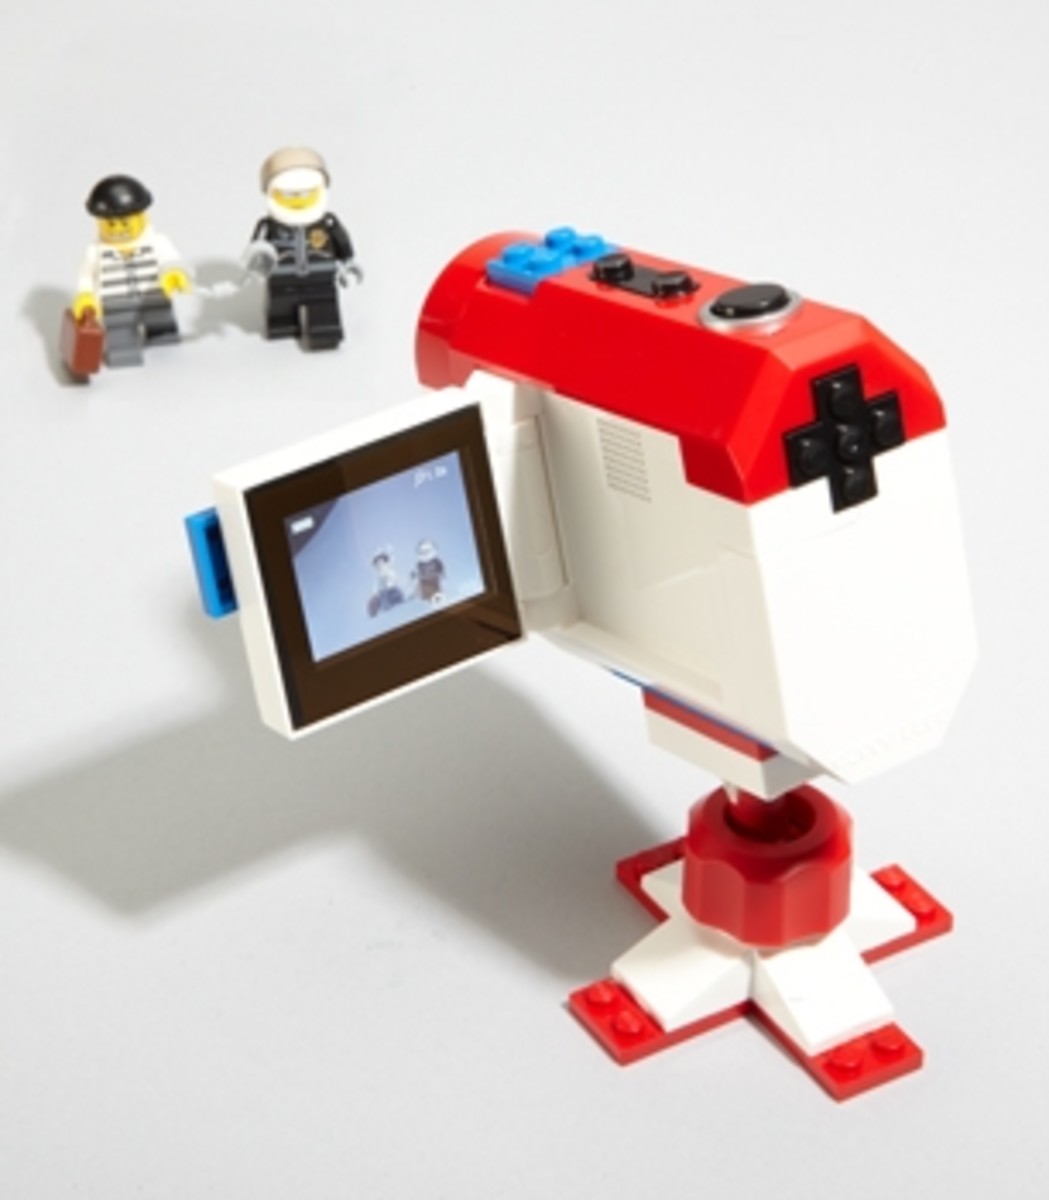 The Lego Stop Animation Video Camera in action showing the adjustable tripod and the viewing screen.